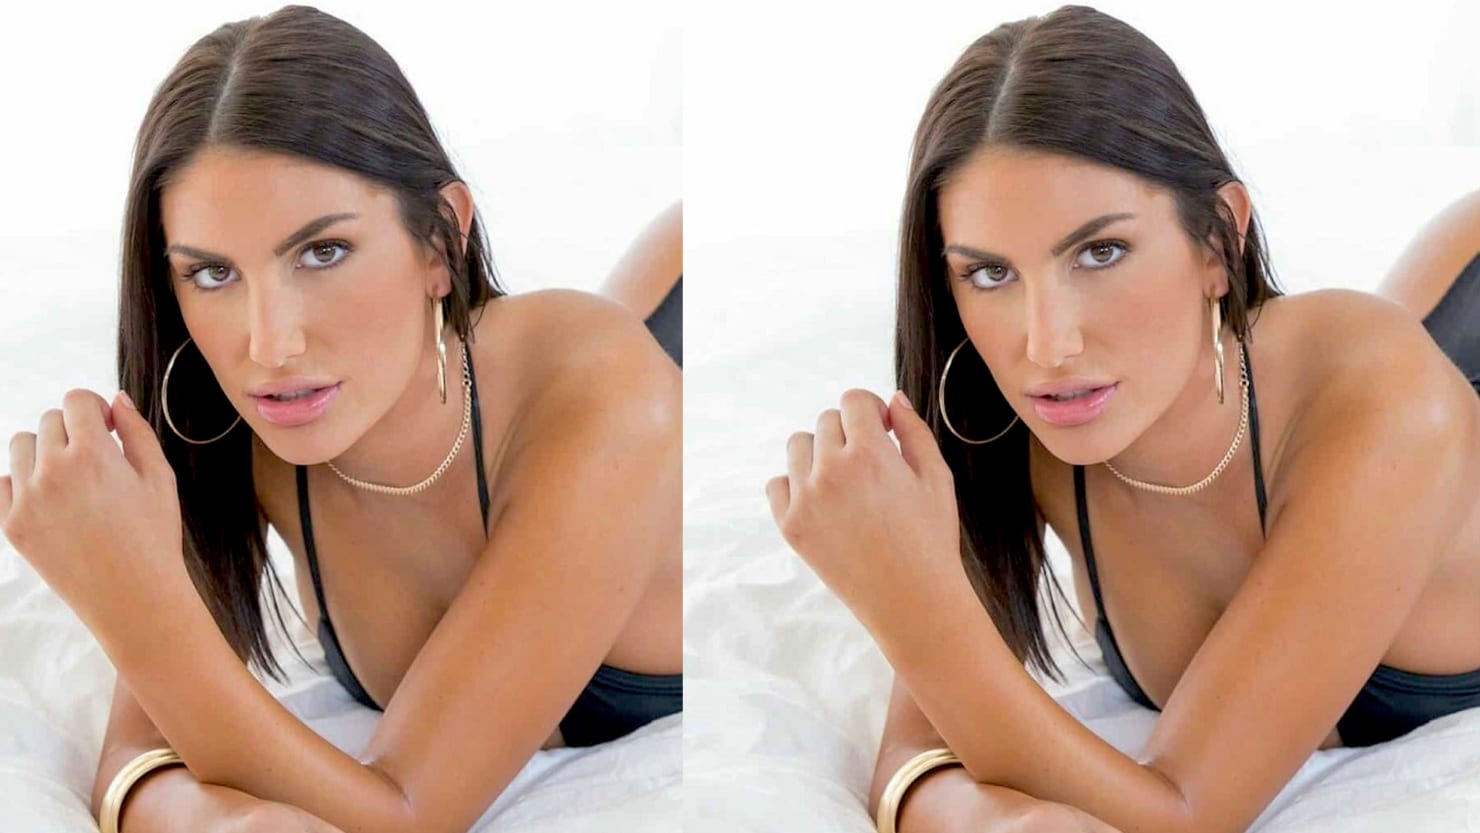 Mother of Cyberbullied Porn Star August Ames Opens Up About Her Last Days pic